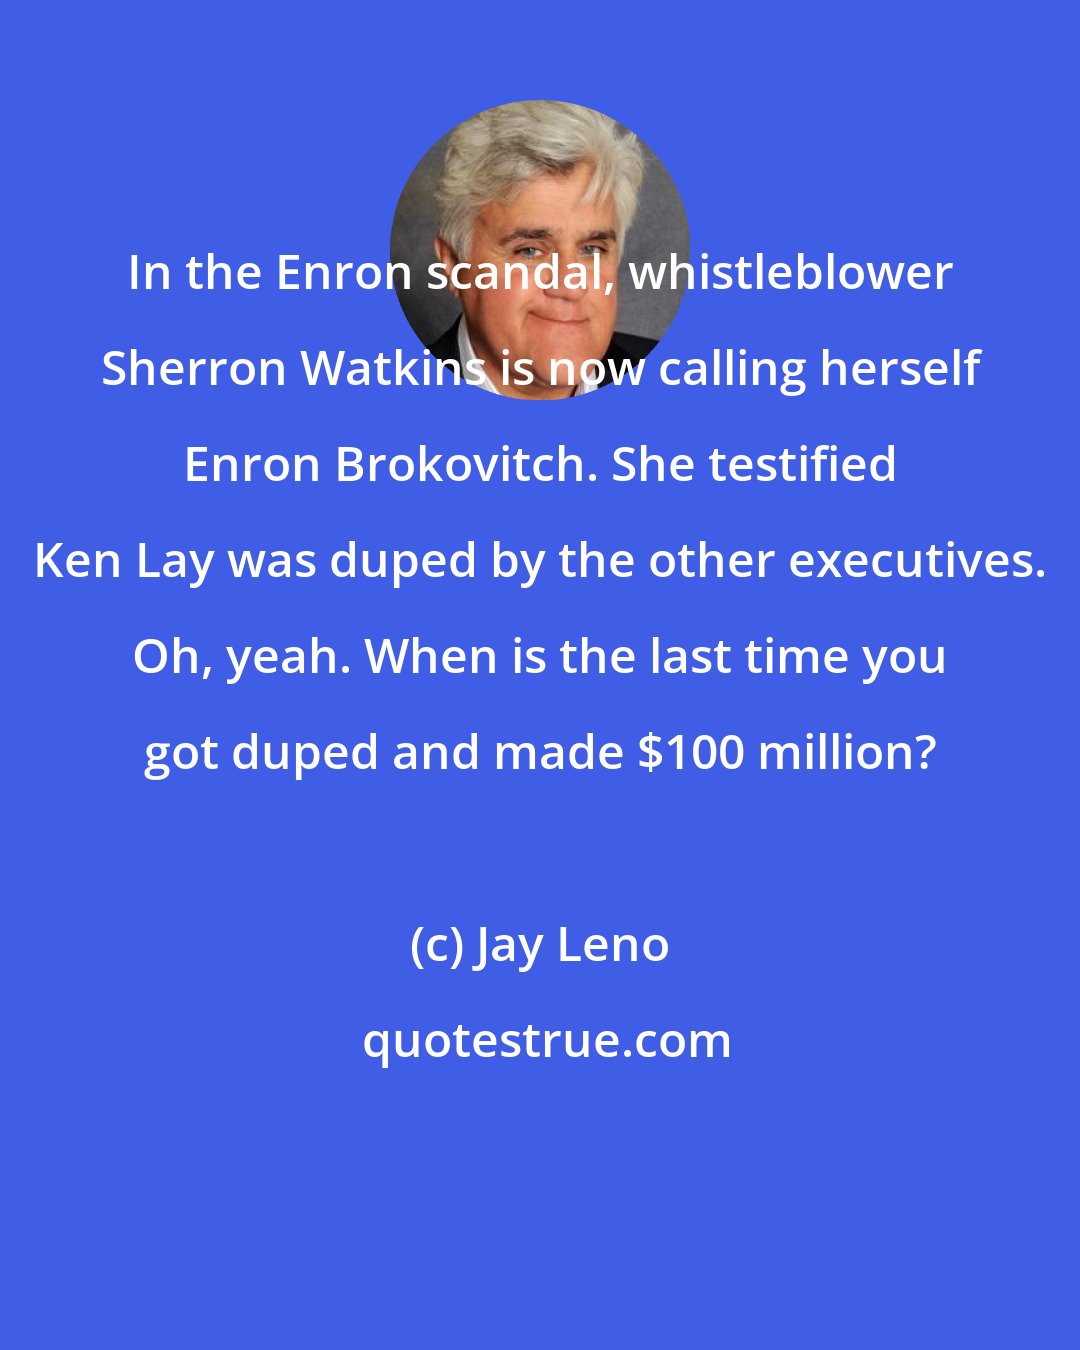 Jay Leno: In the Enron scandal, whistleblower Sherron Watkins is now calling herself Enron Brokovitch. She testified Ken Lay was duped by the other executives. Oh, yeah. When is the last time you got duped and made $100 million?